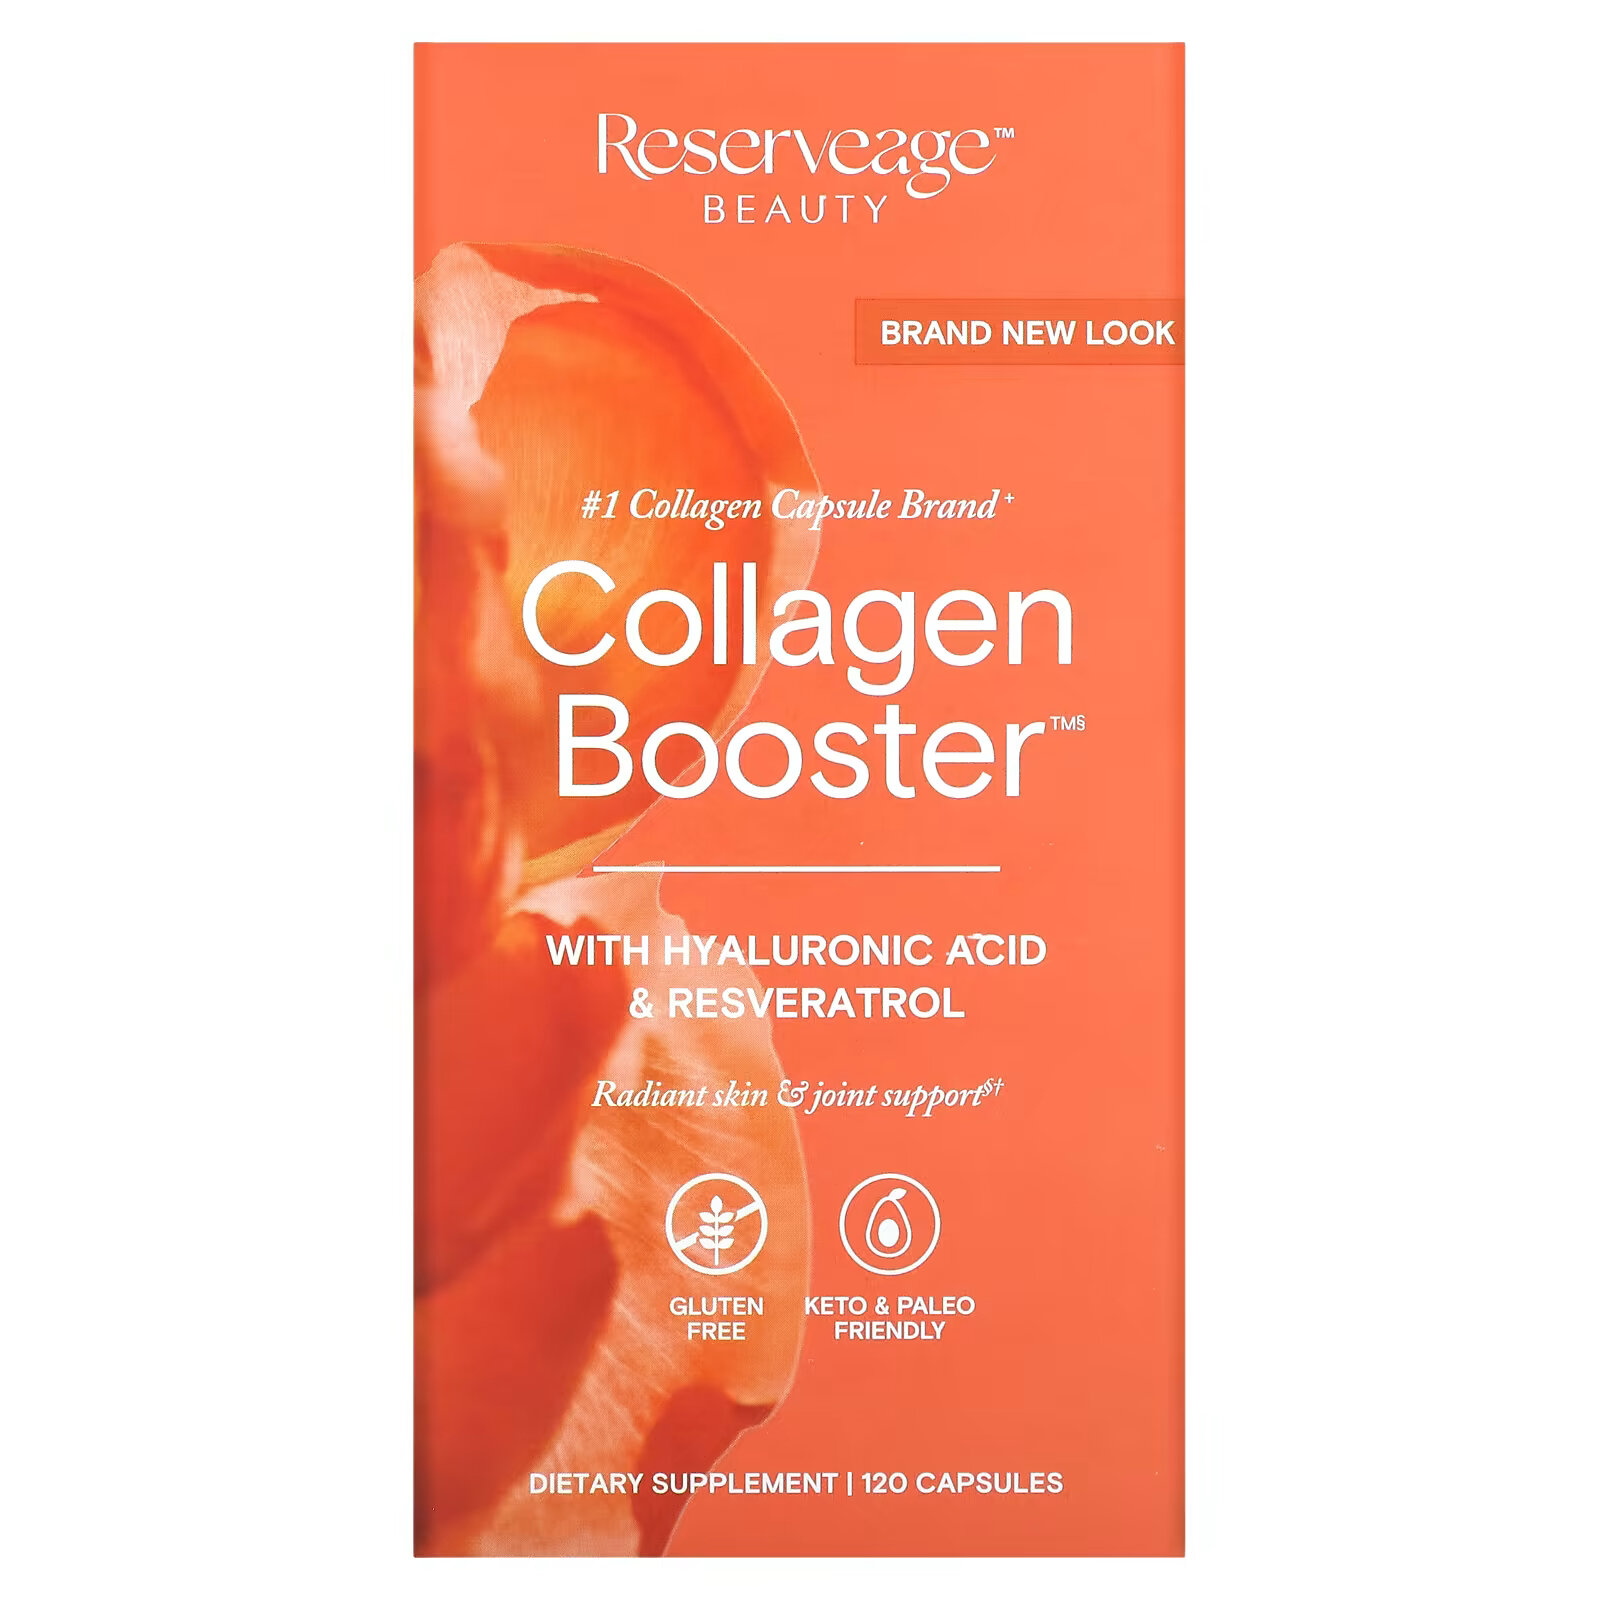 ReserveAge Nutrition, Collagen Booster, добавка с коллагеном, 120 капсул reserveage nutrition collagen booster добавка с коллагеном 120 капсул